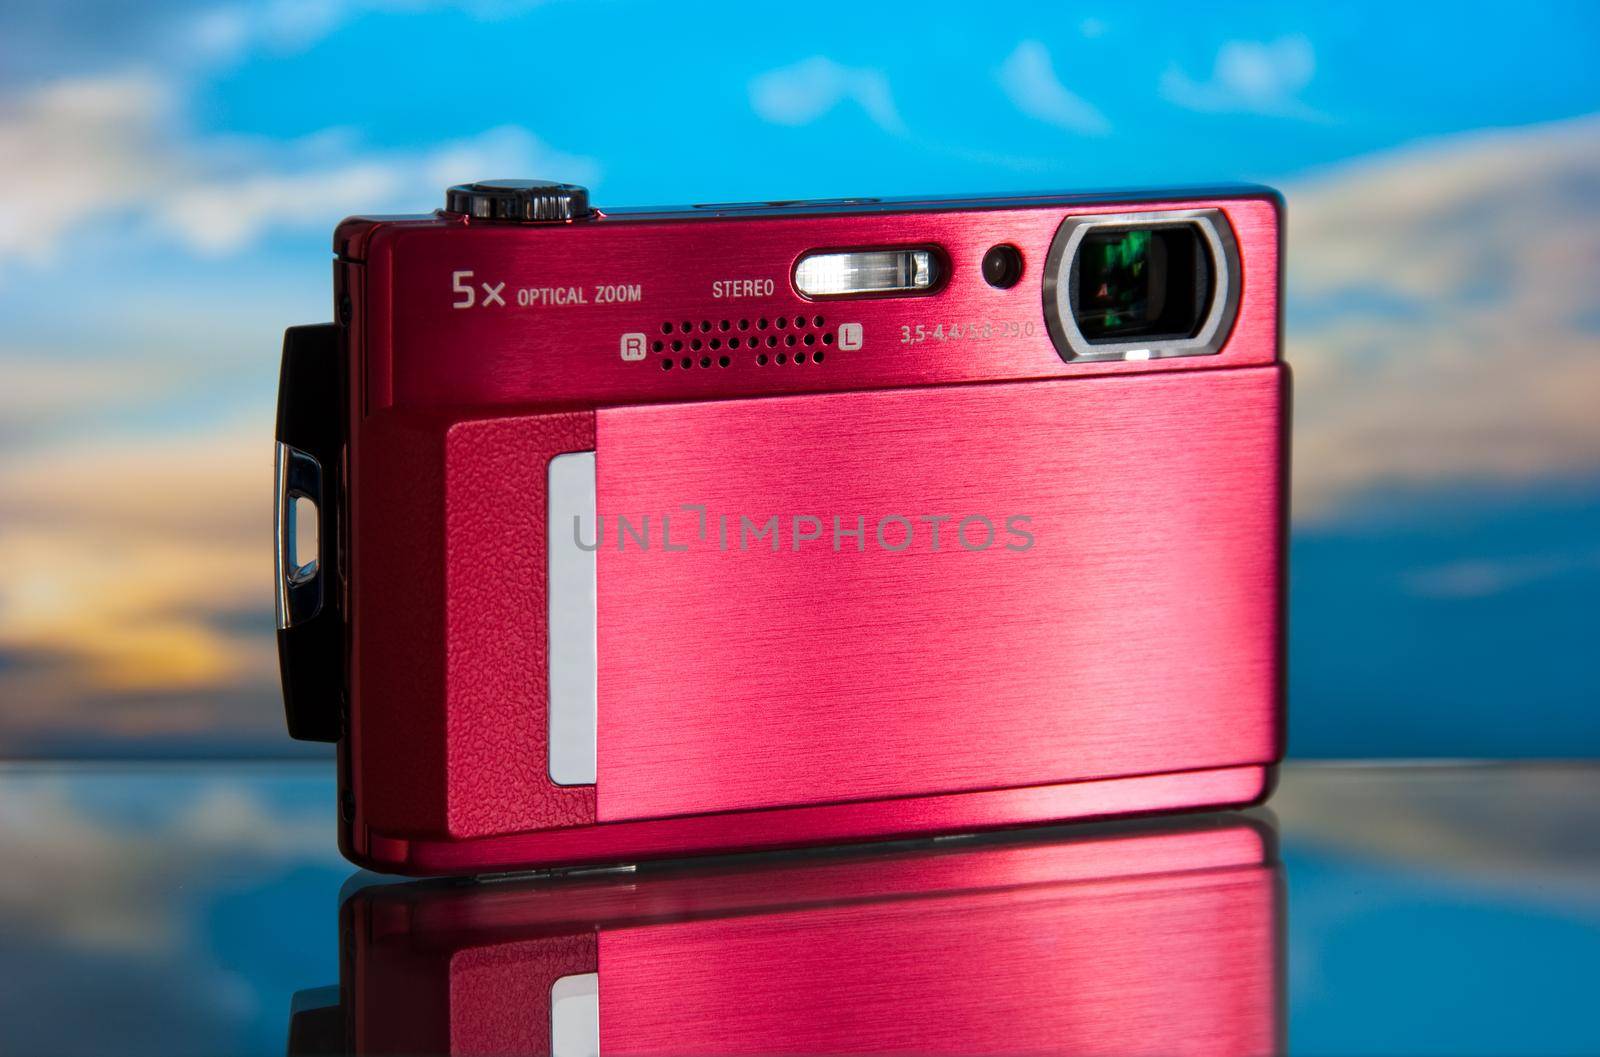 photo of the compact digital camera with beautiful background and glass reflection